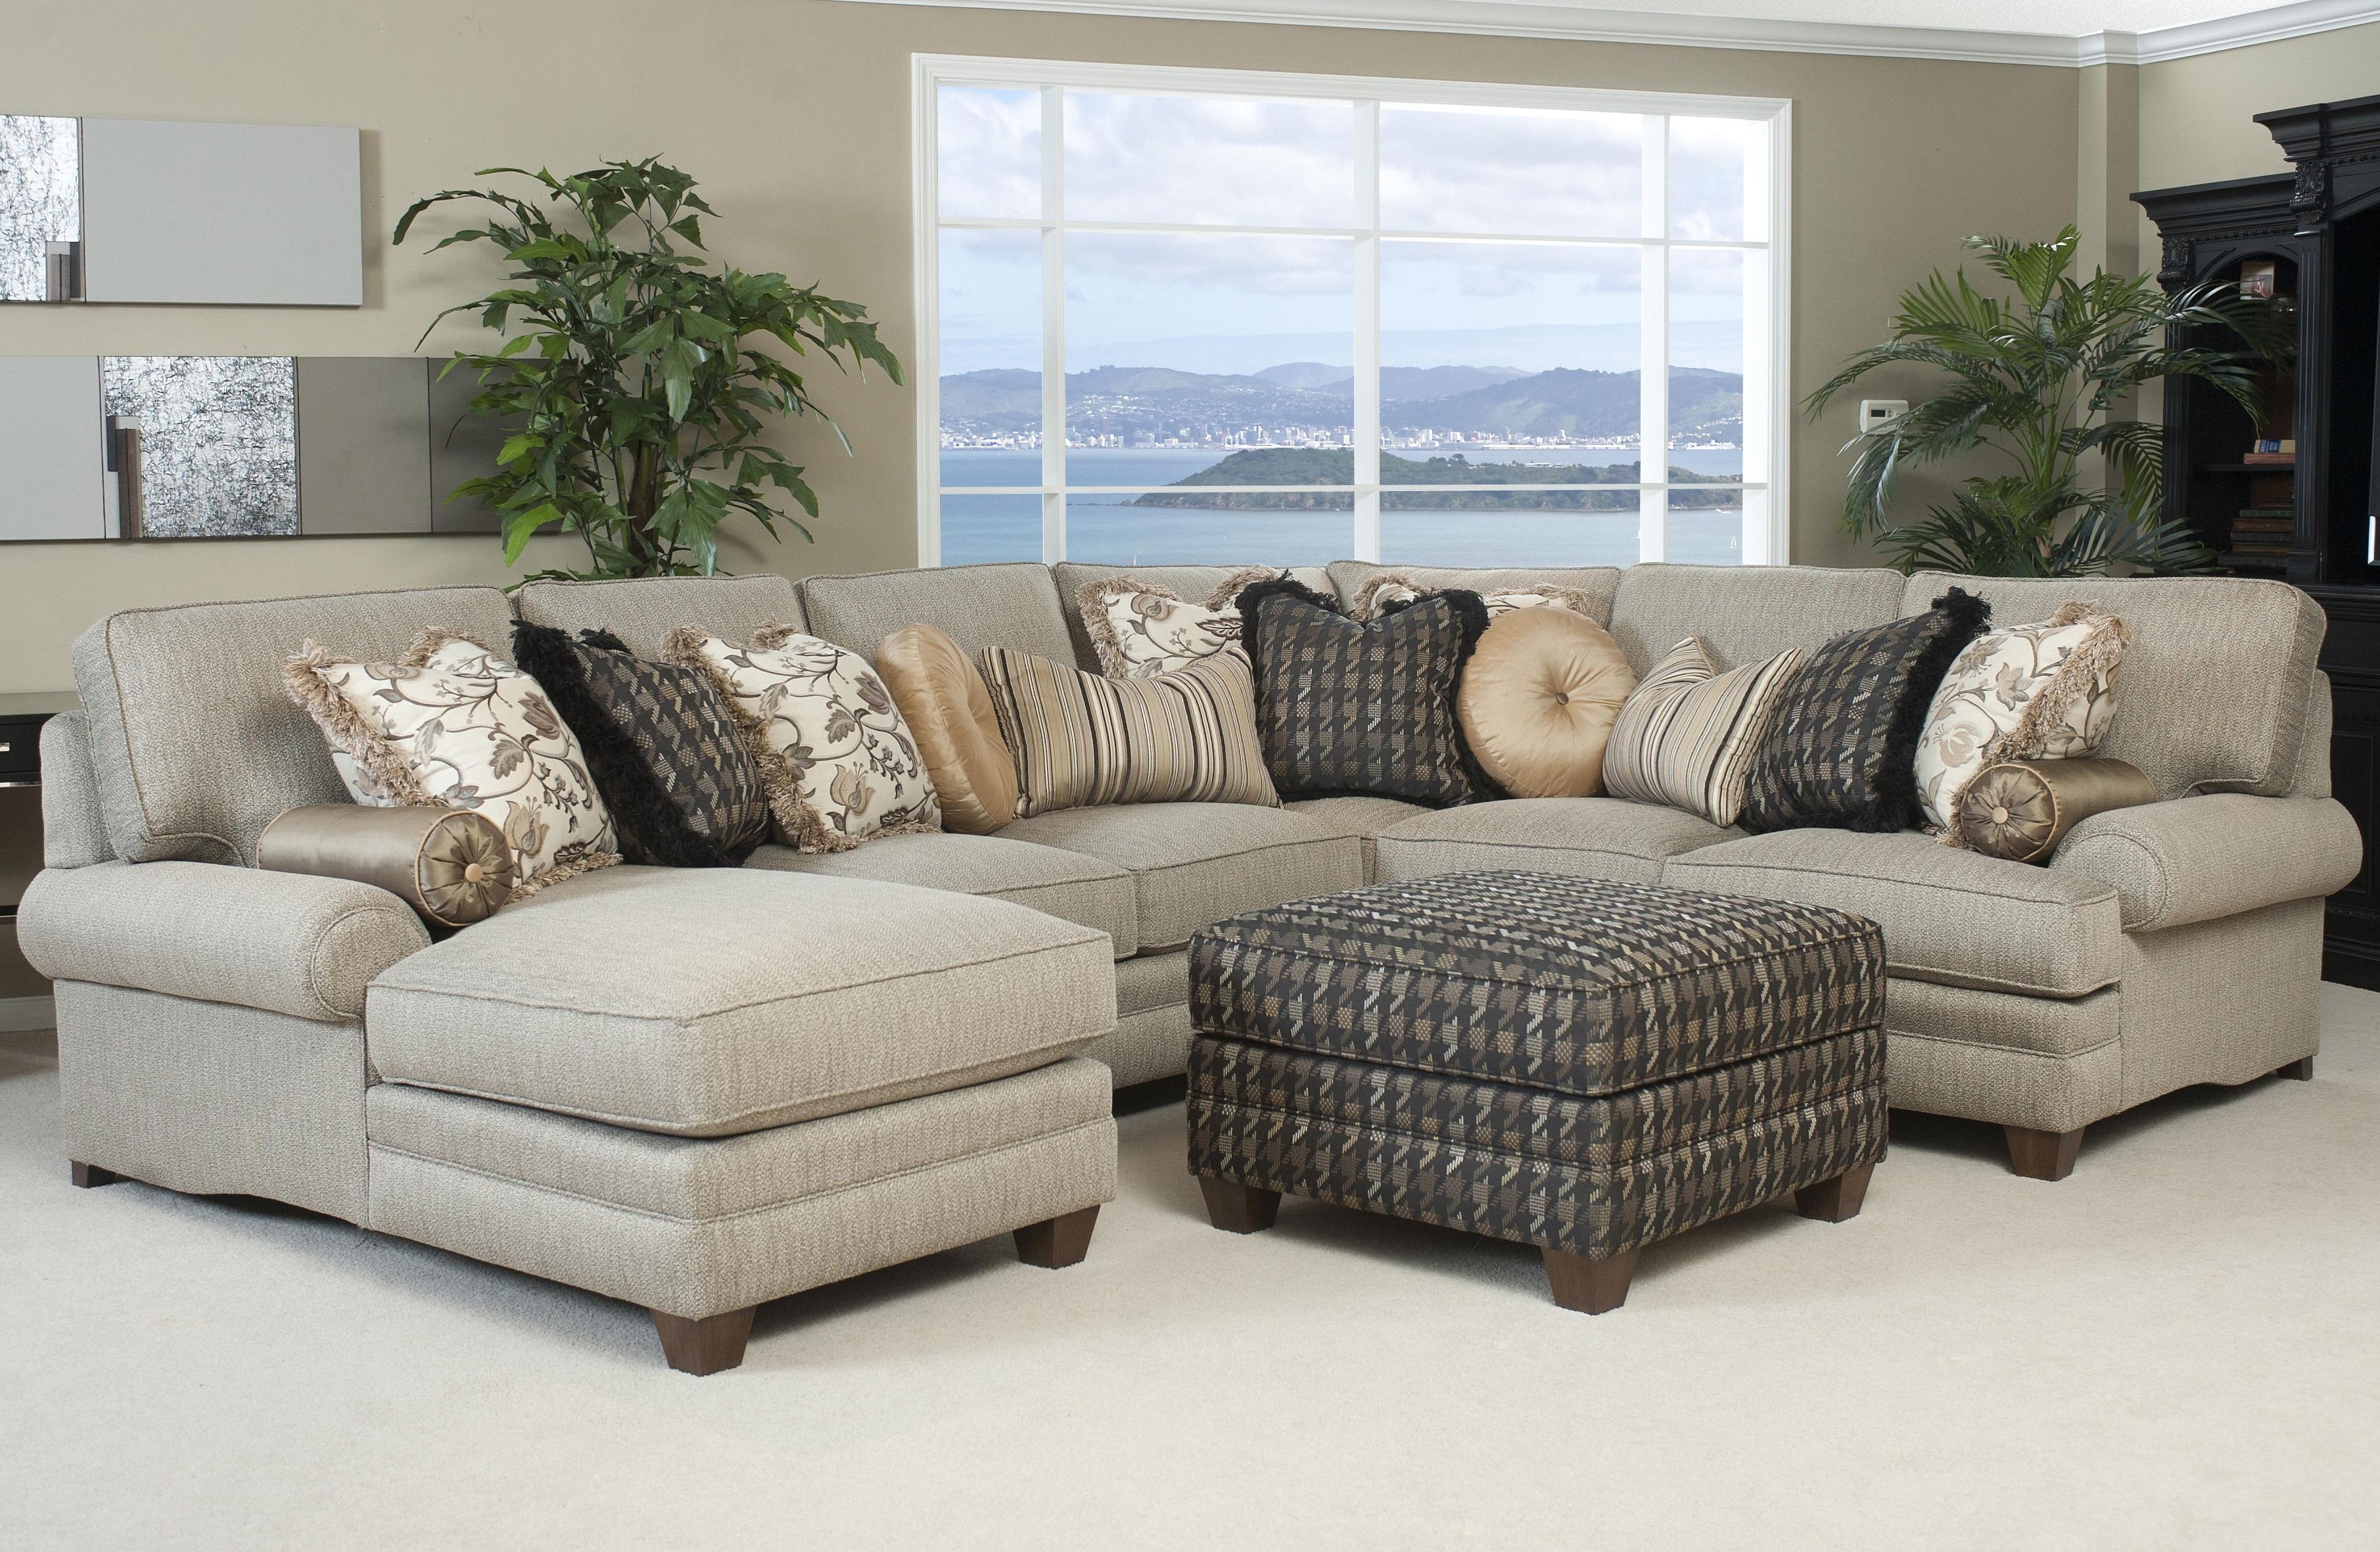 Newest Sectional Sofa Design: Best Of The Best Traditional Sectional In Sectional Sofas (View 8 of 15)